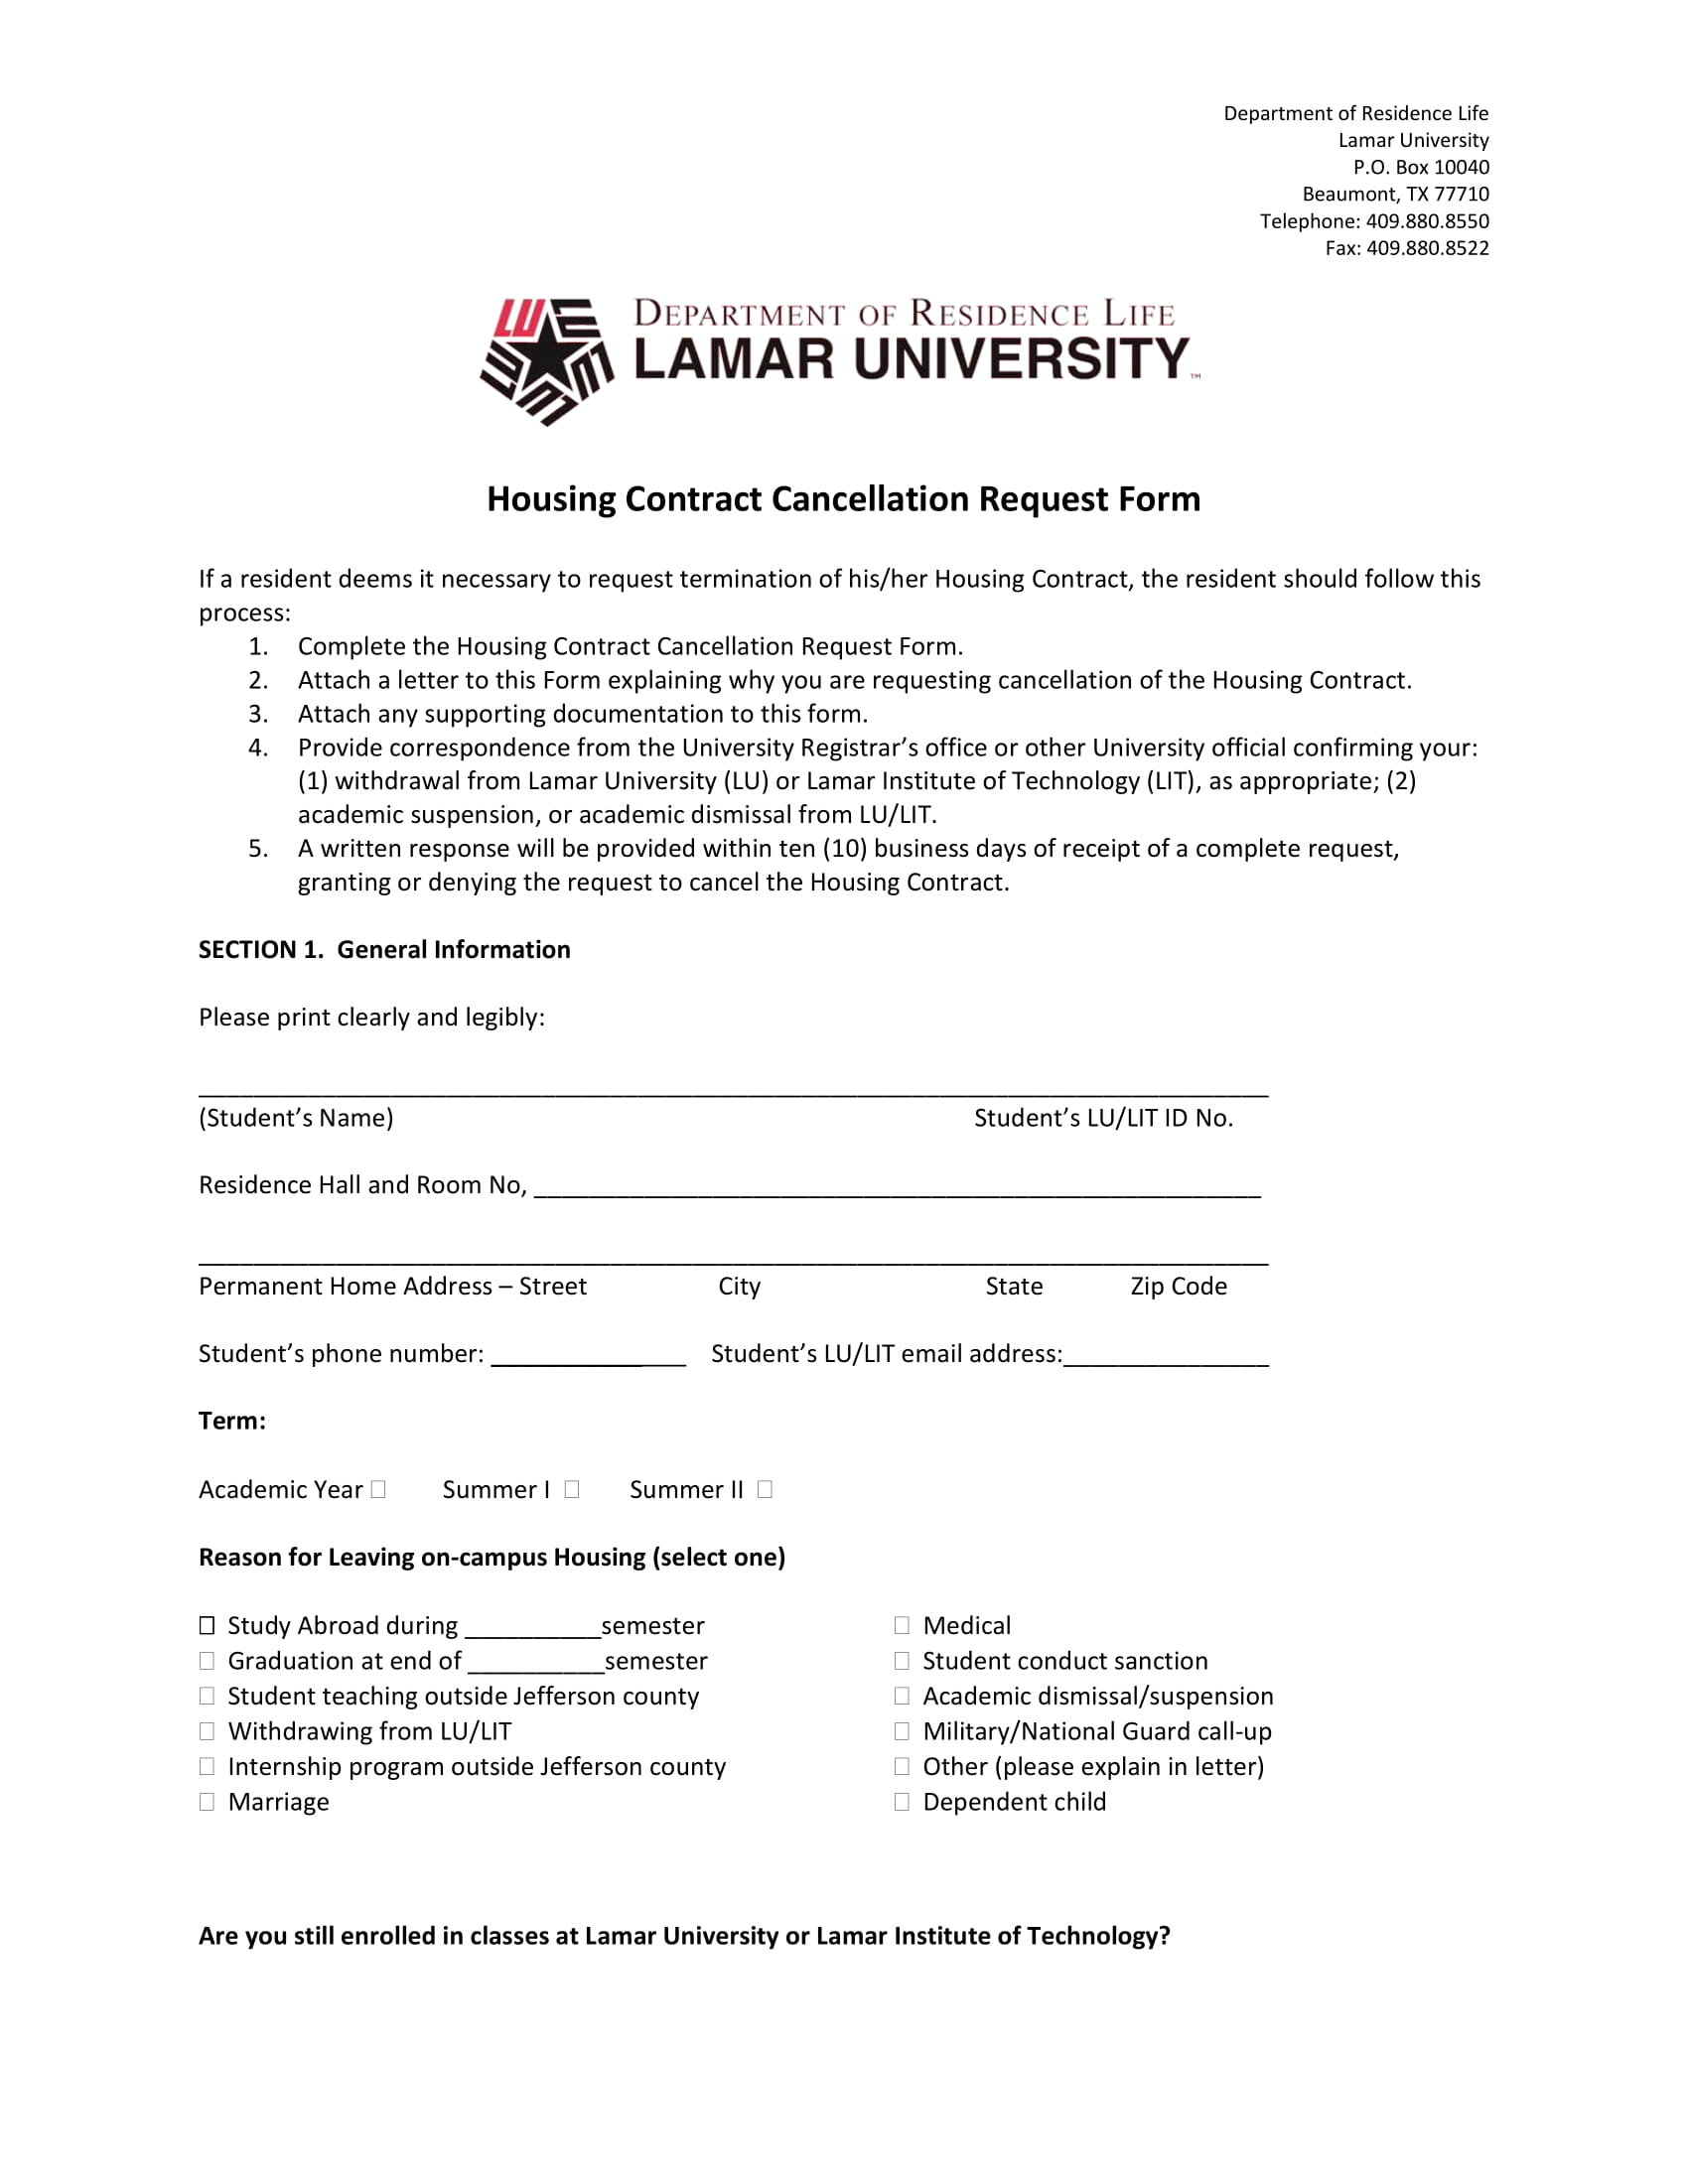 housing contract cancellation request form 1